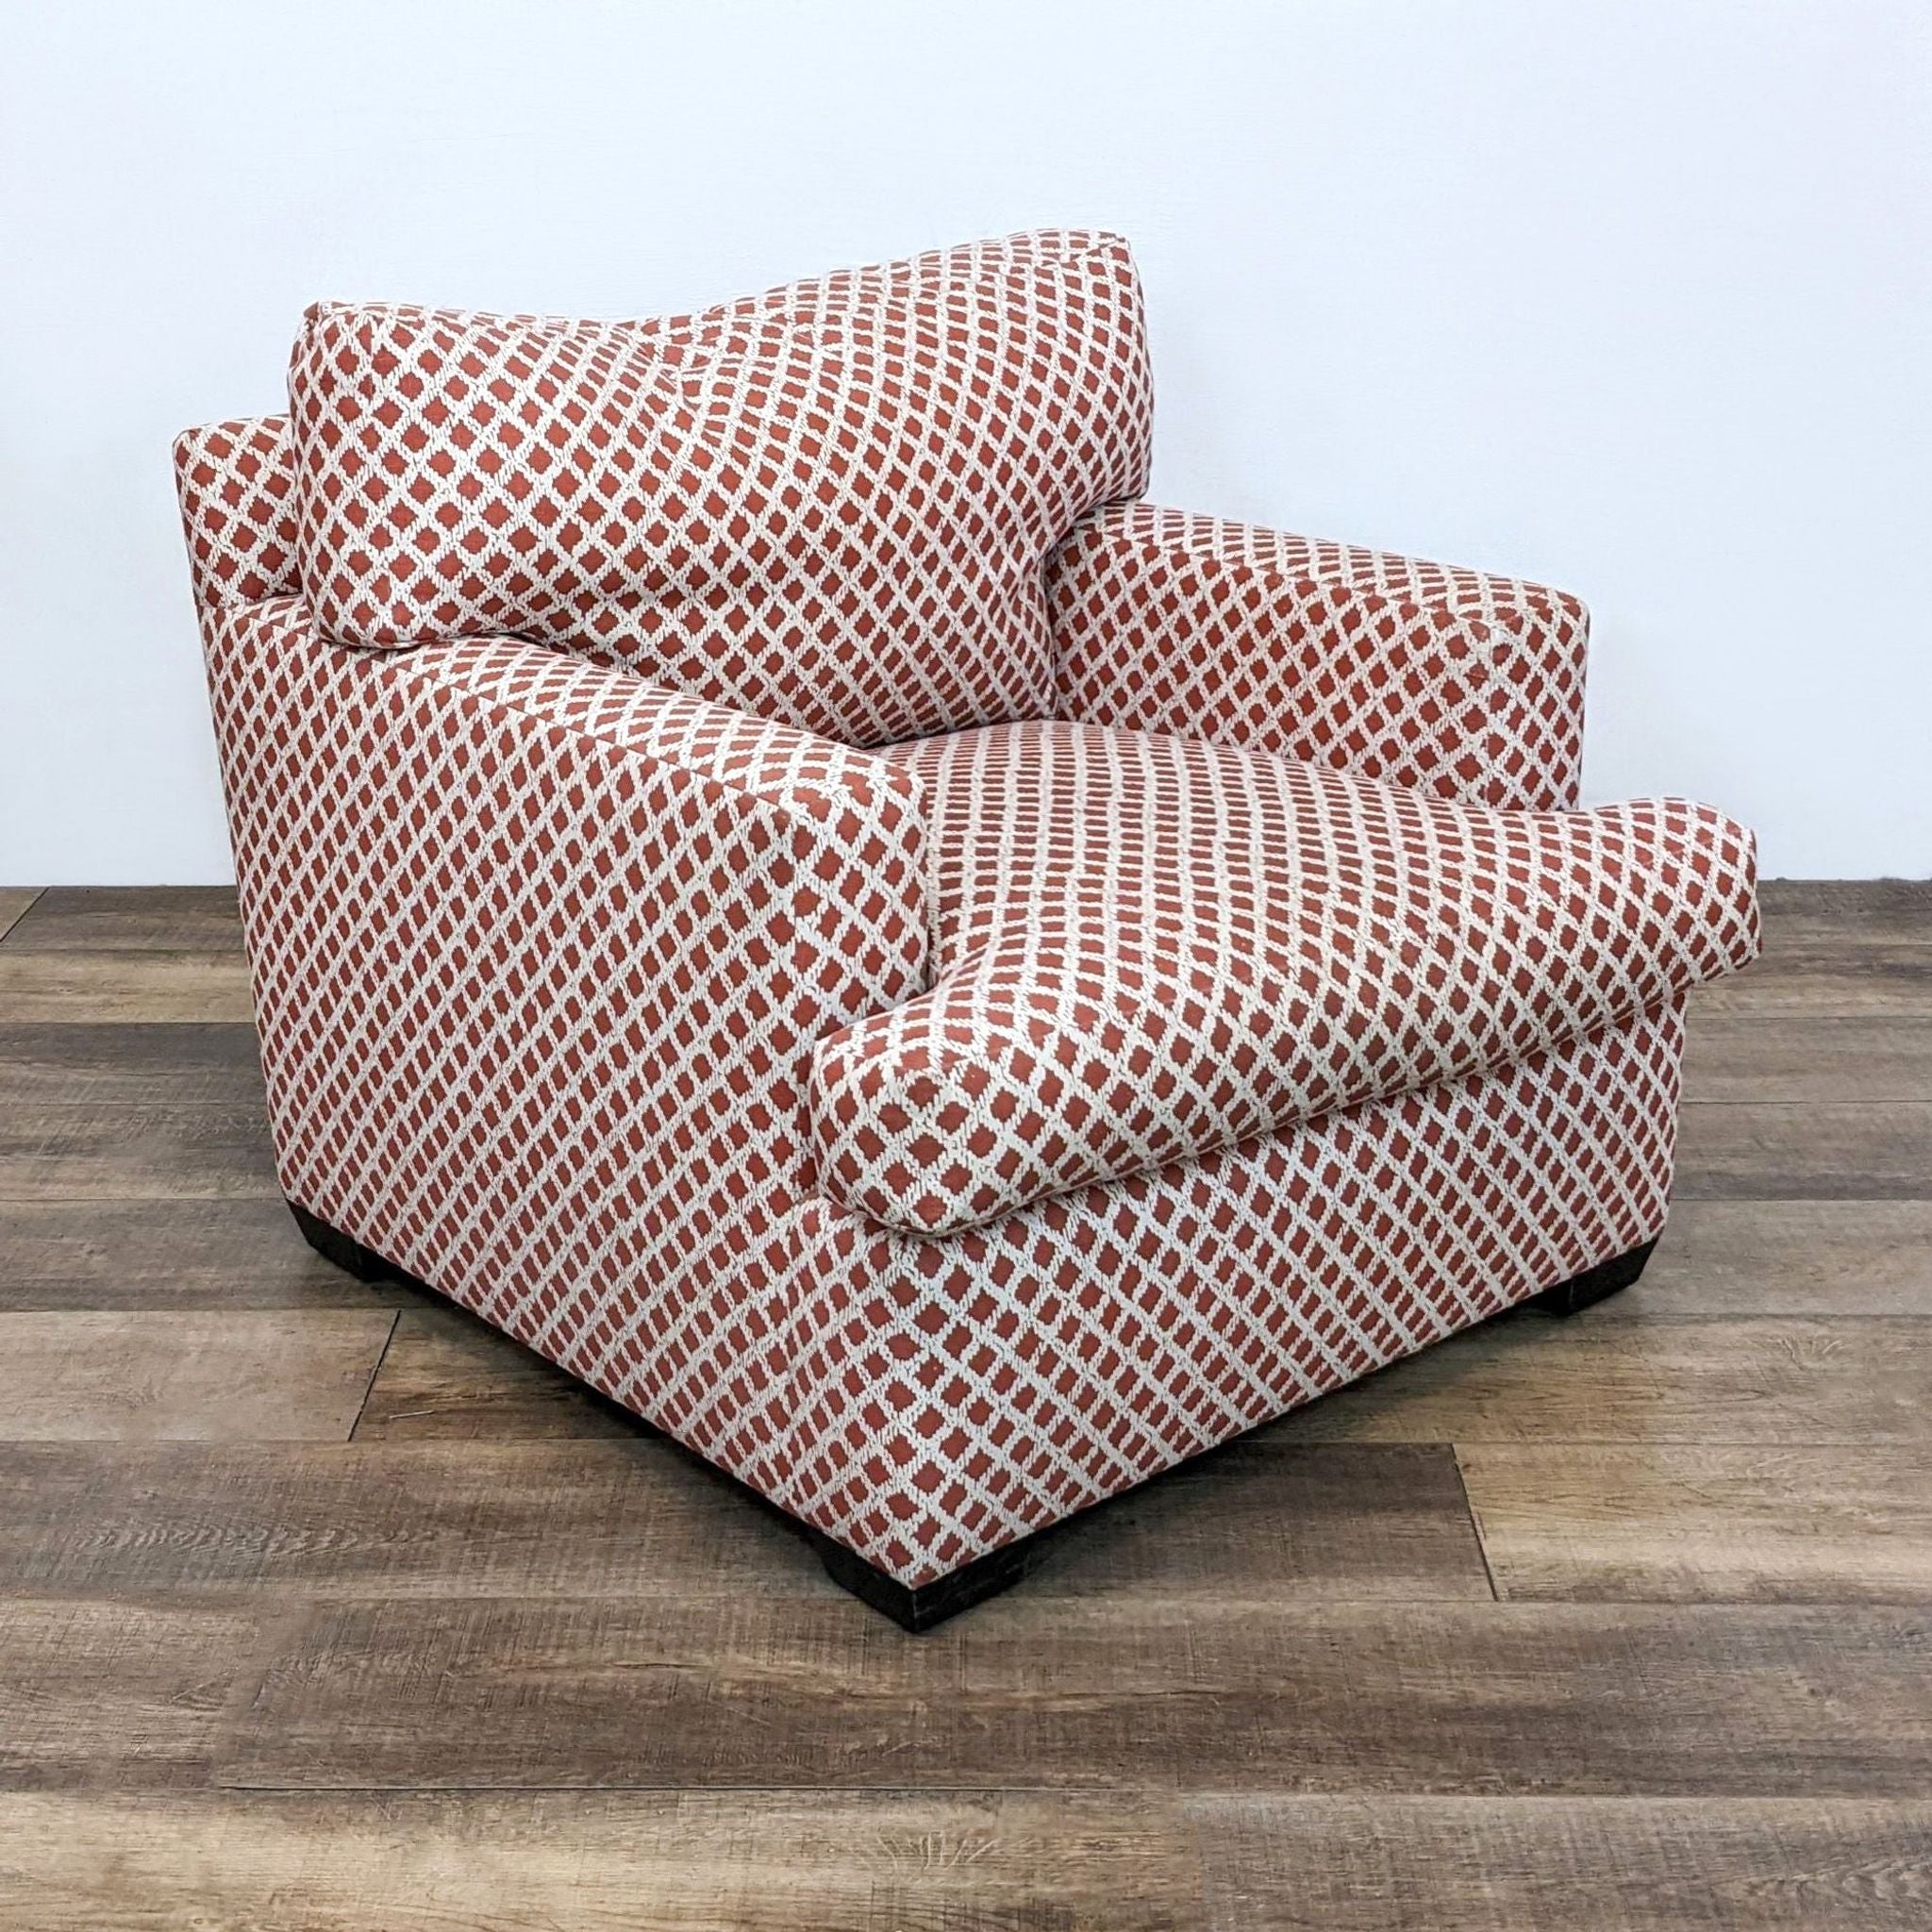 3. Red lattice upholstered A. Rudin chair at an angle, highlighting its plush cushions and contemporary style.